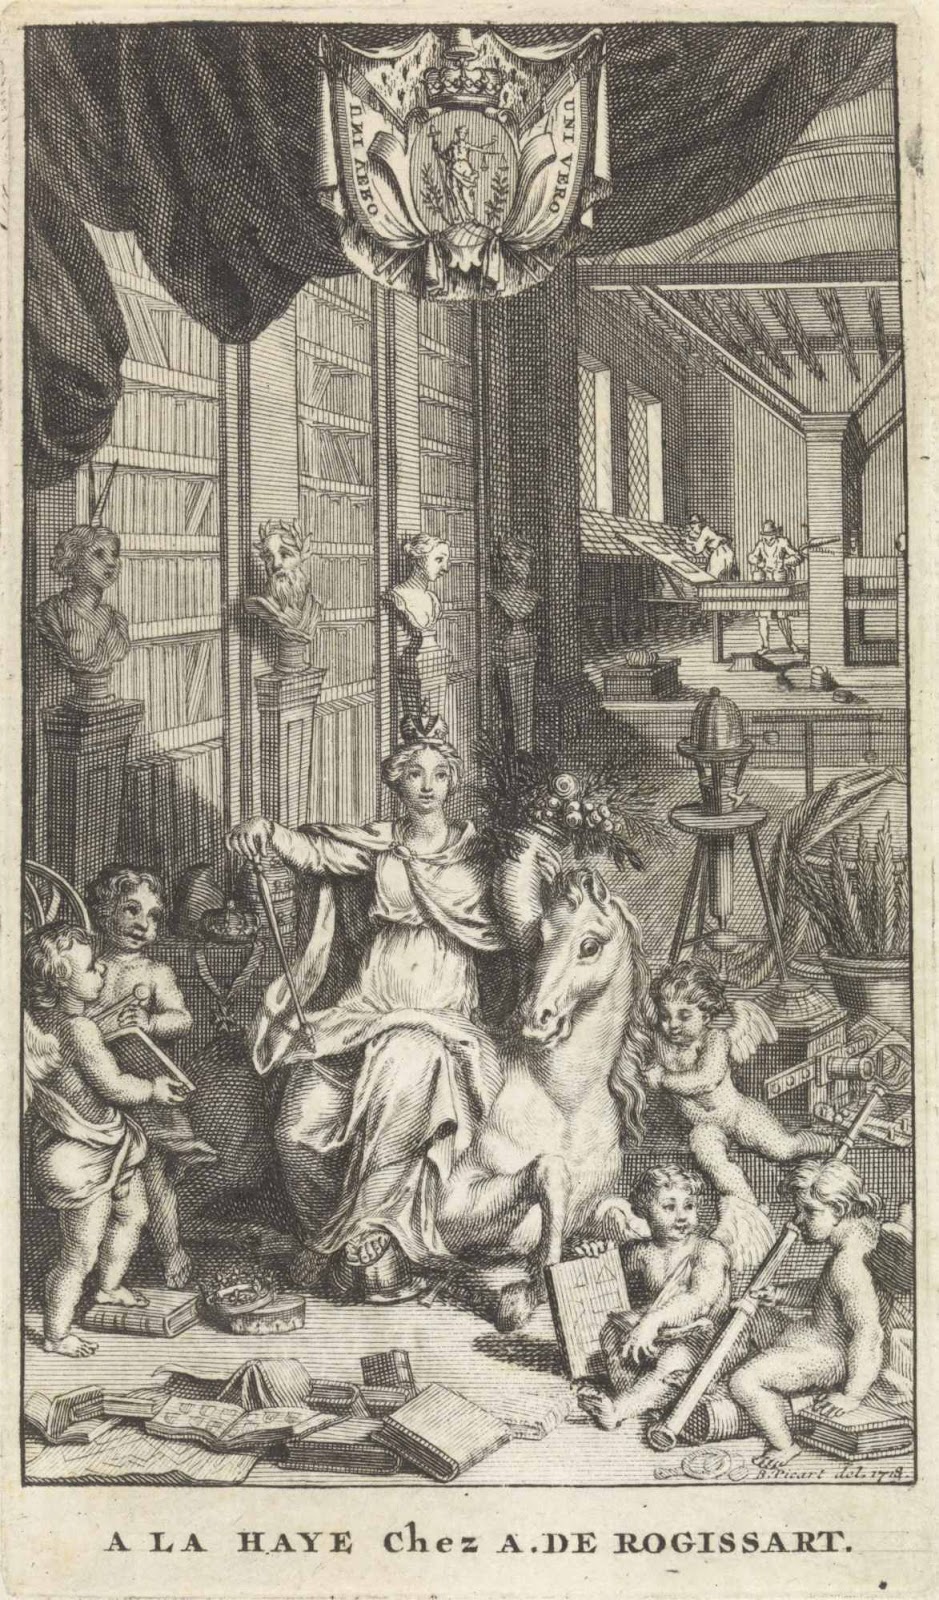 Spencer Alley: Decorative Etchings from 18th-century Europe